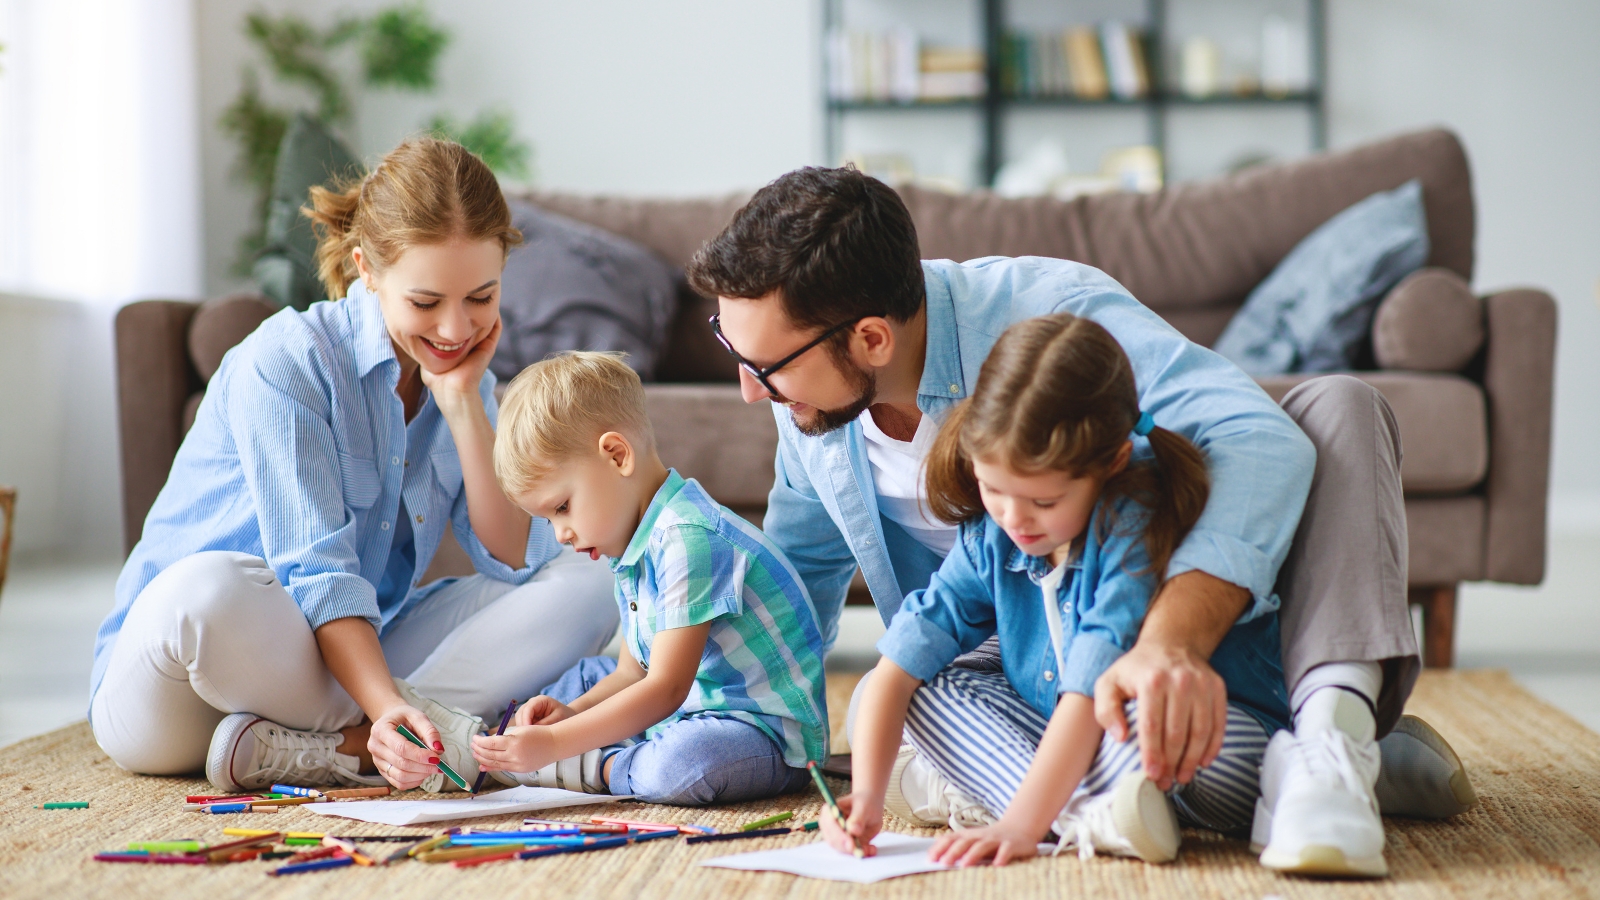 Get closer to your kids with Family Sharing Time